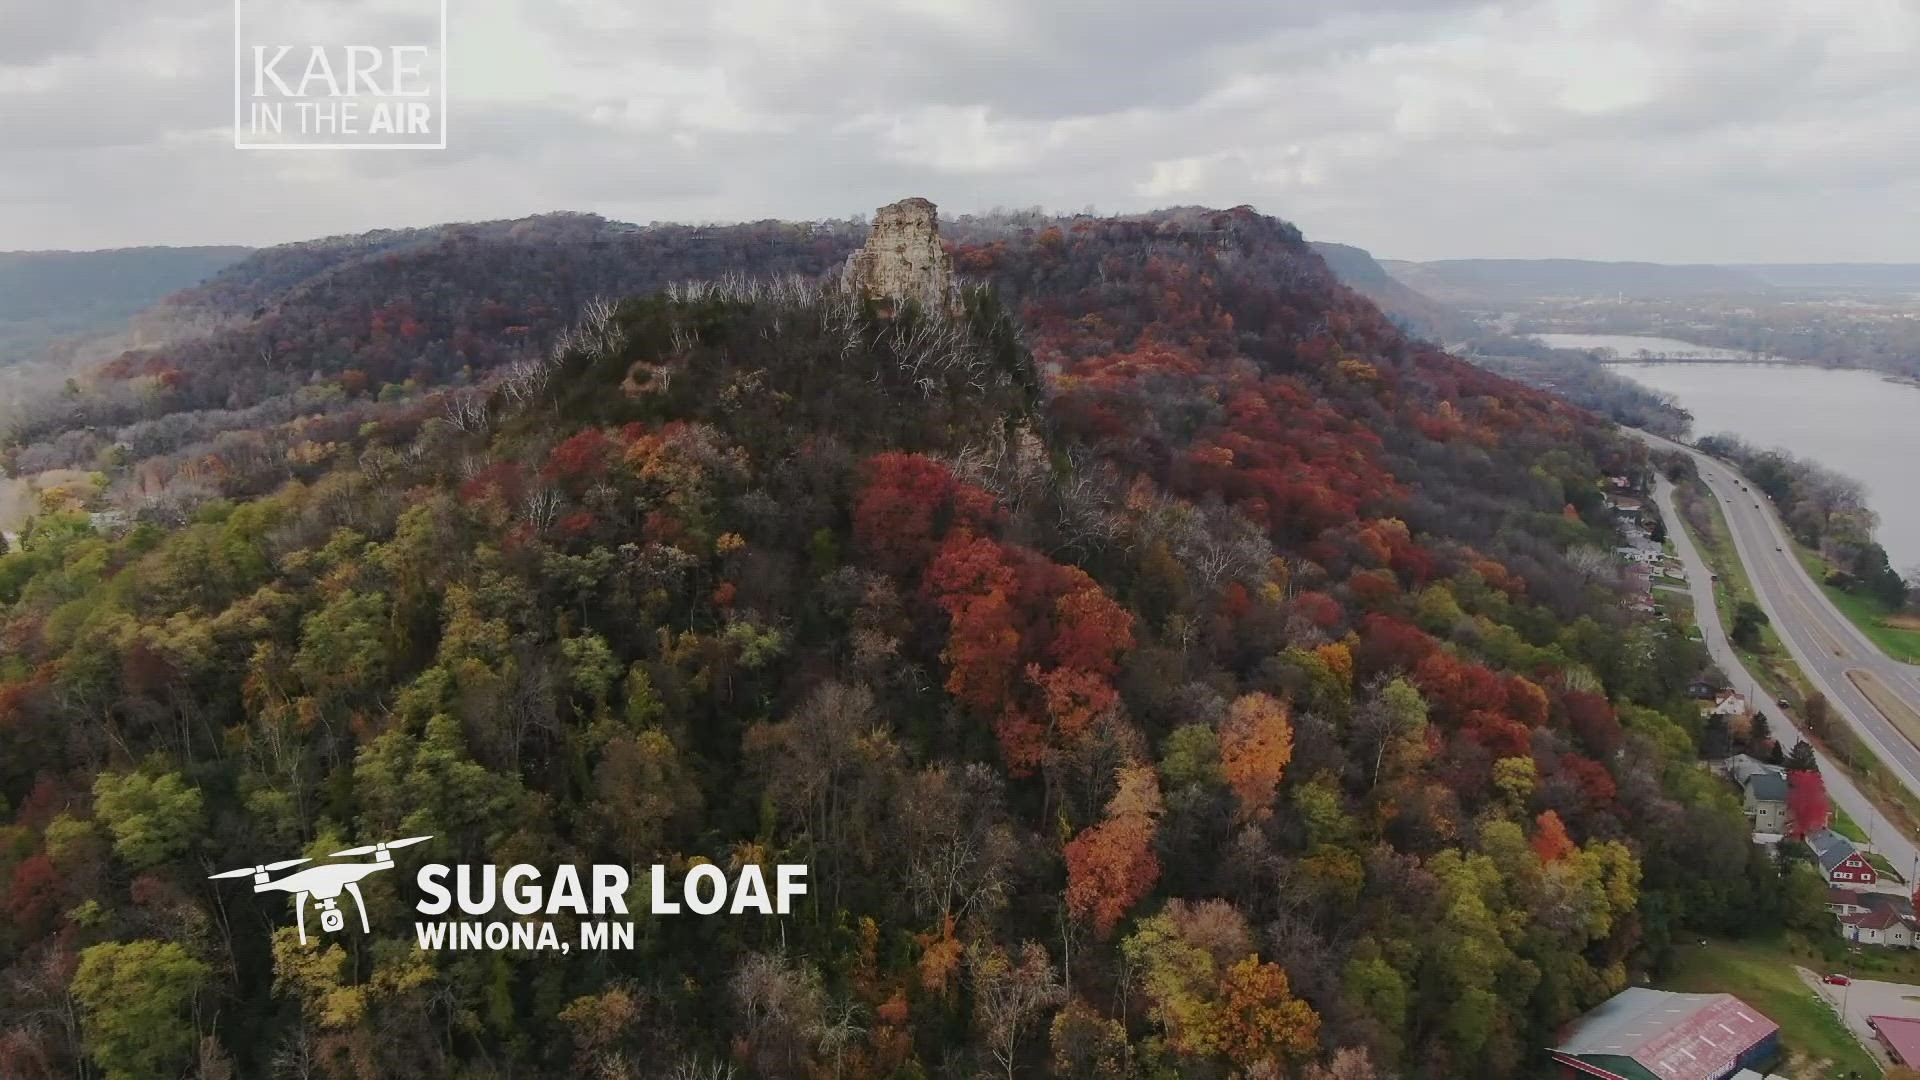 Sugar Loaf is a rocky limestone formation that towers some 580 feet above Lake Winona, a former channel of the Mississippi River as it winds through Winona County.